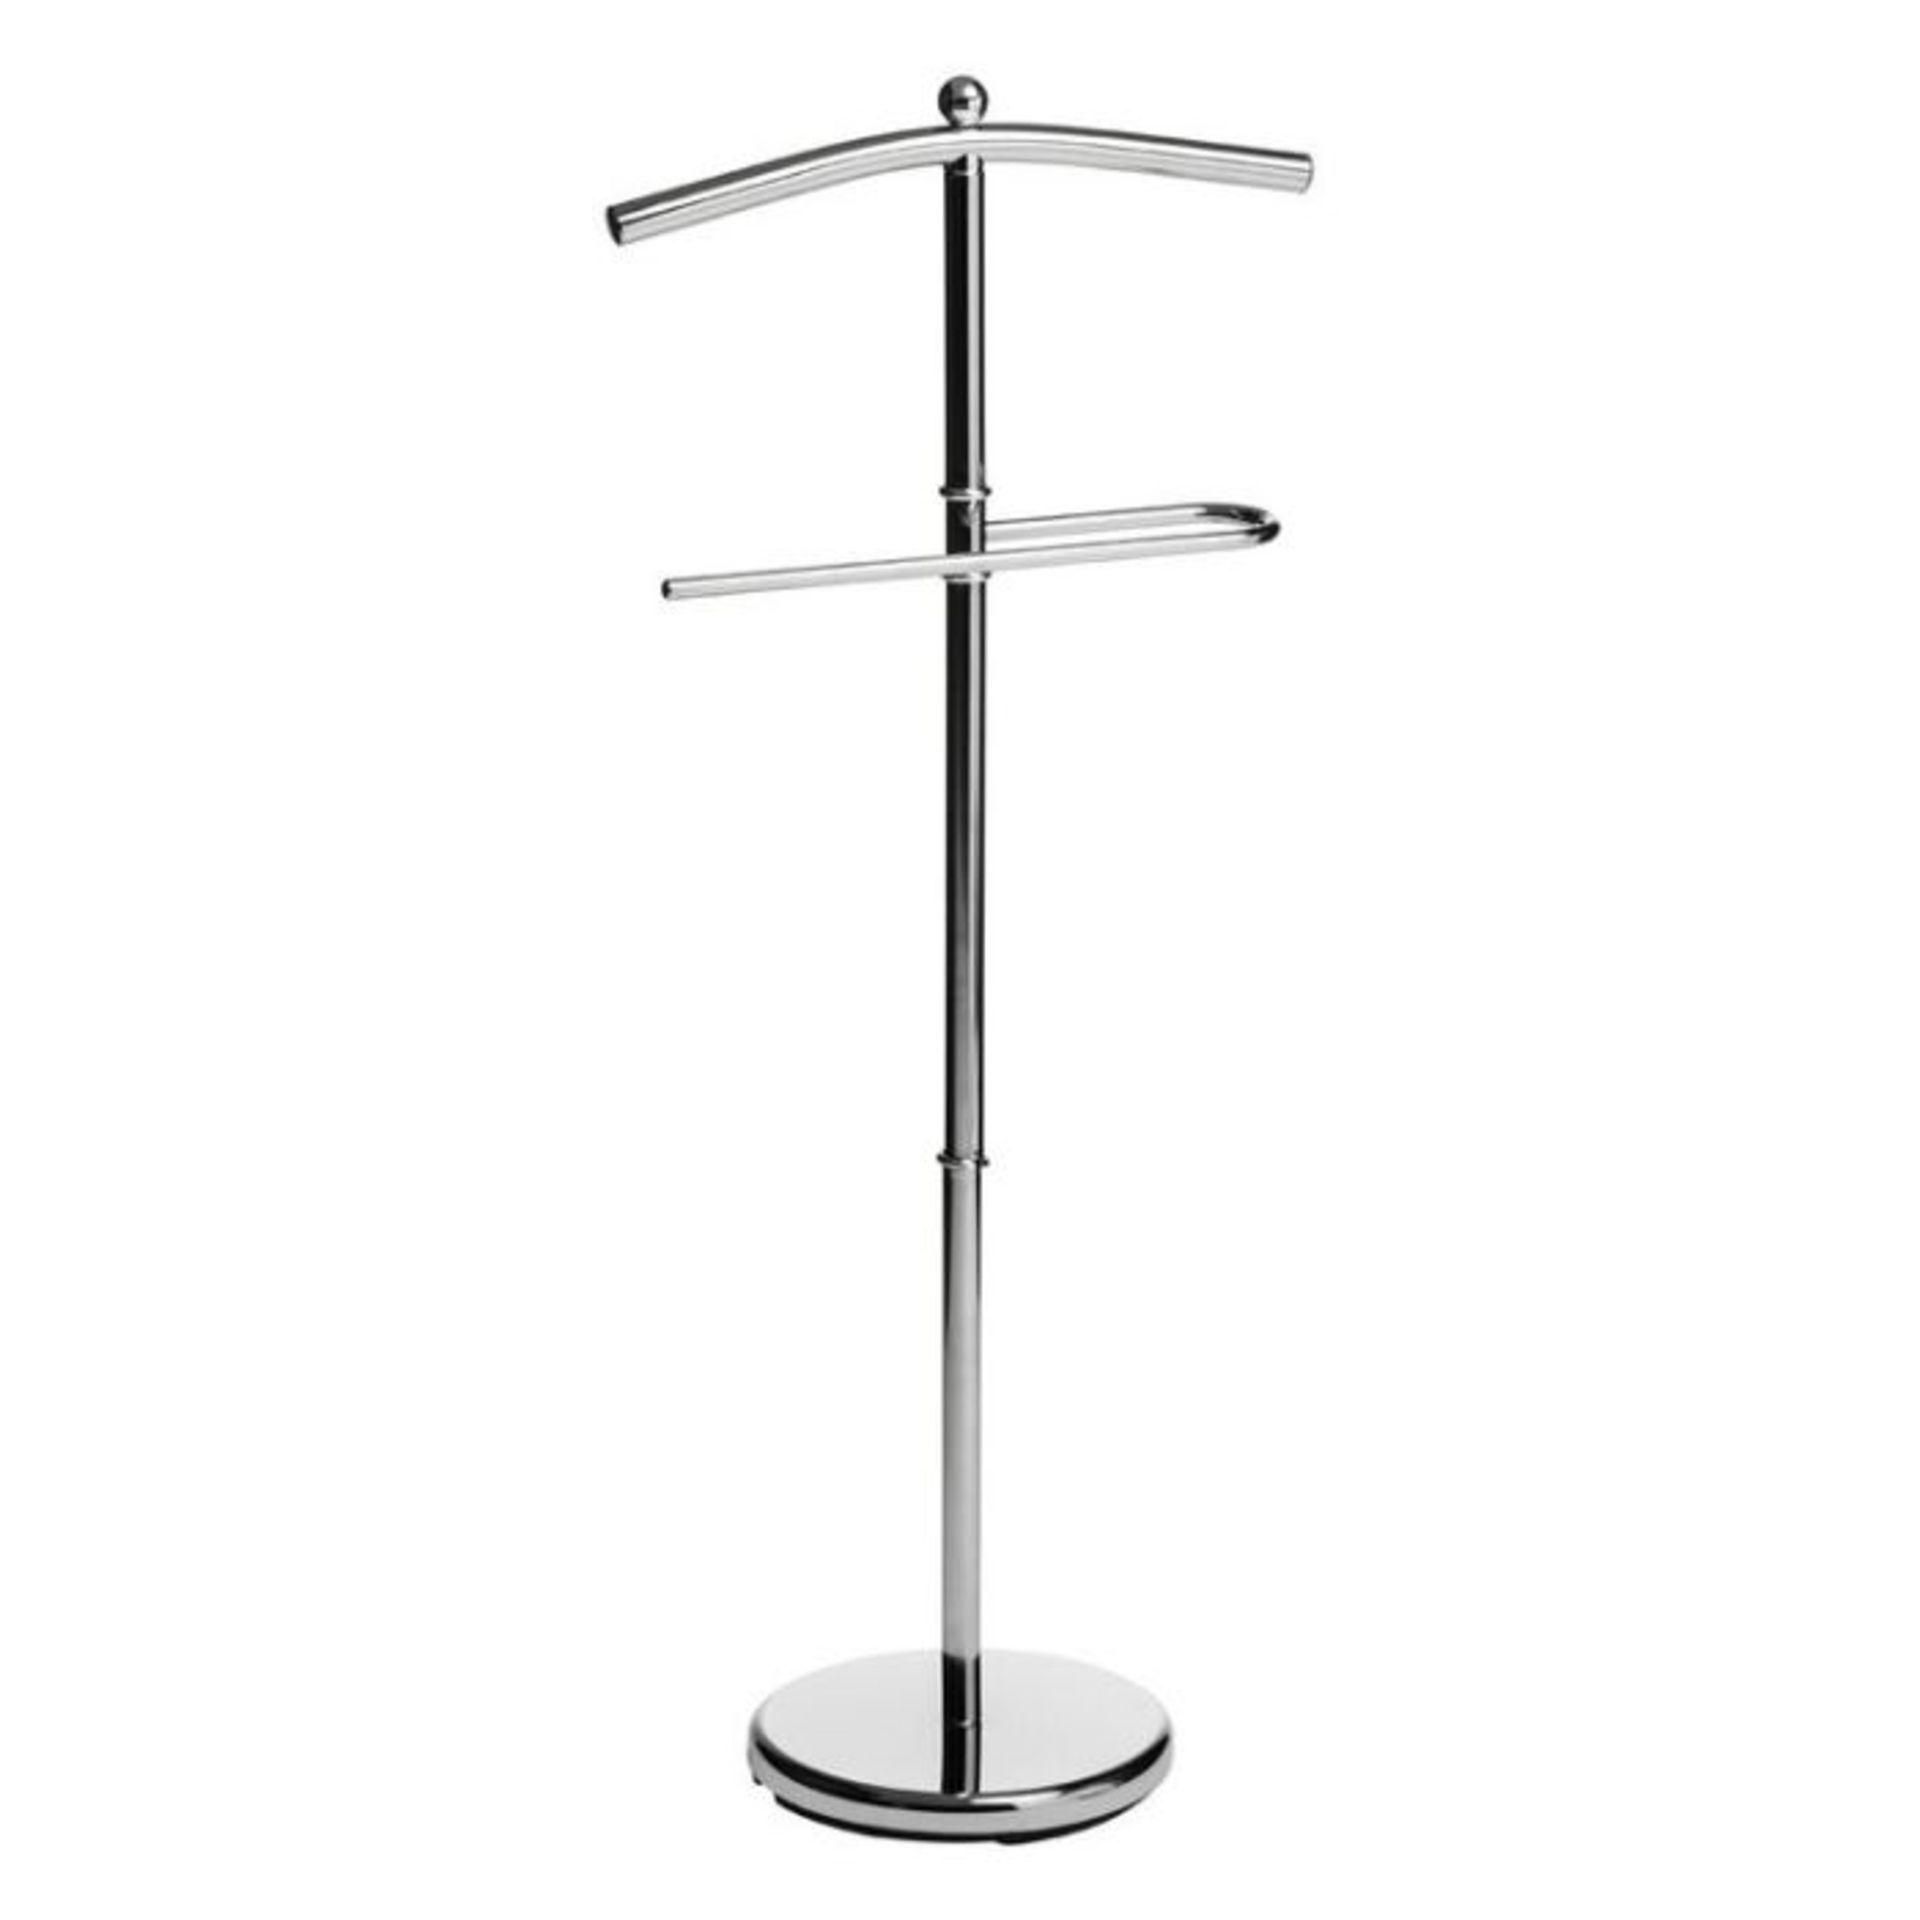 Symple Stuff,Valet Stand - RRP £58.99(CSHO7696 - 23905/35)